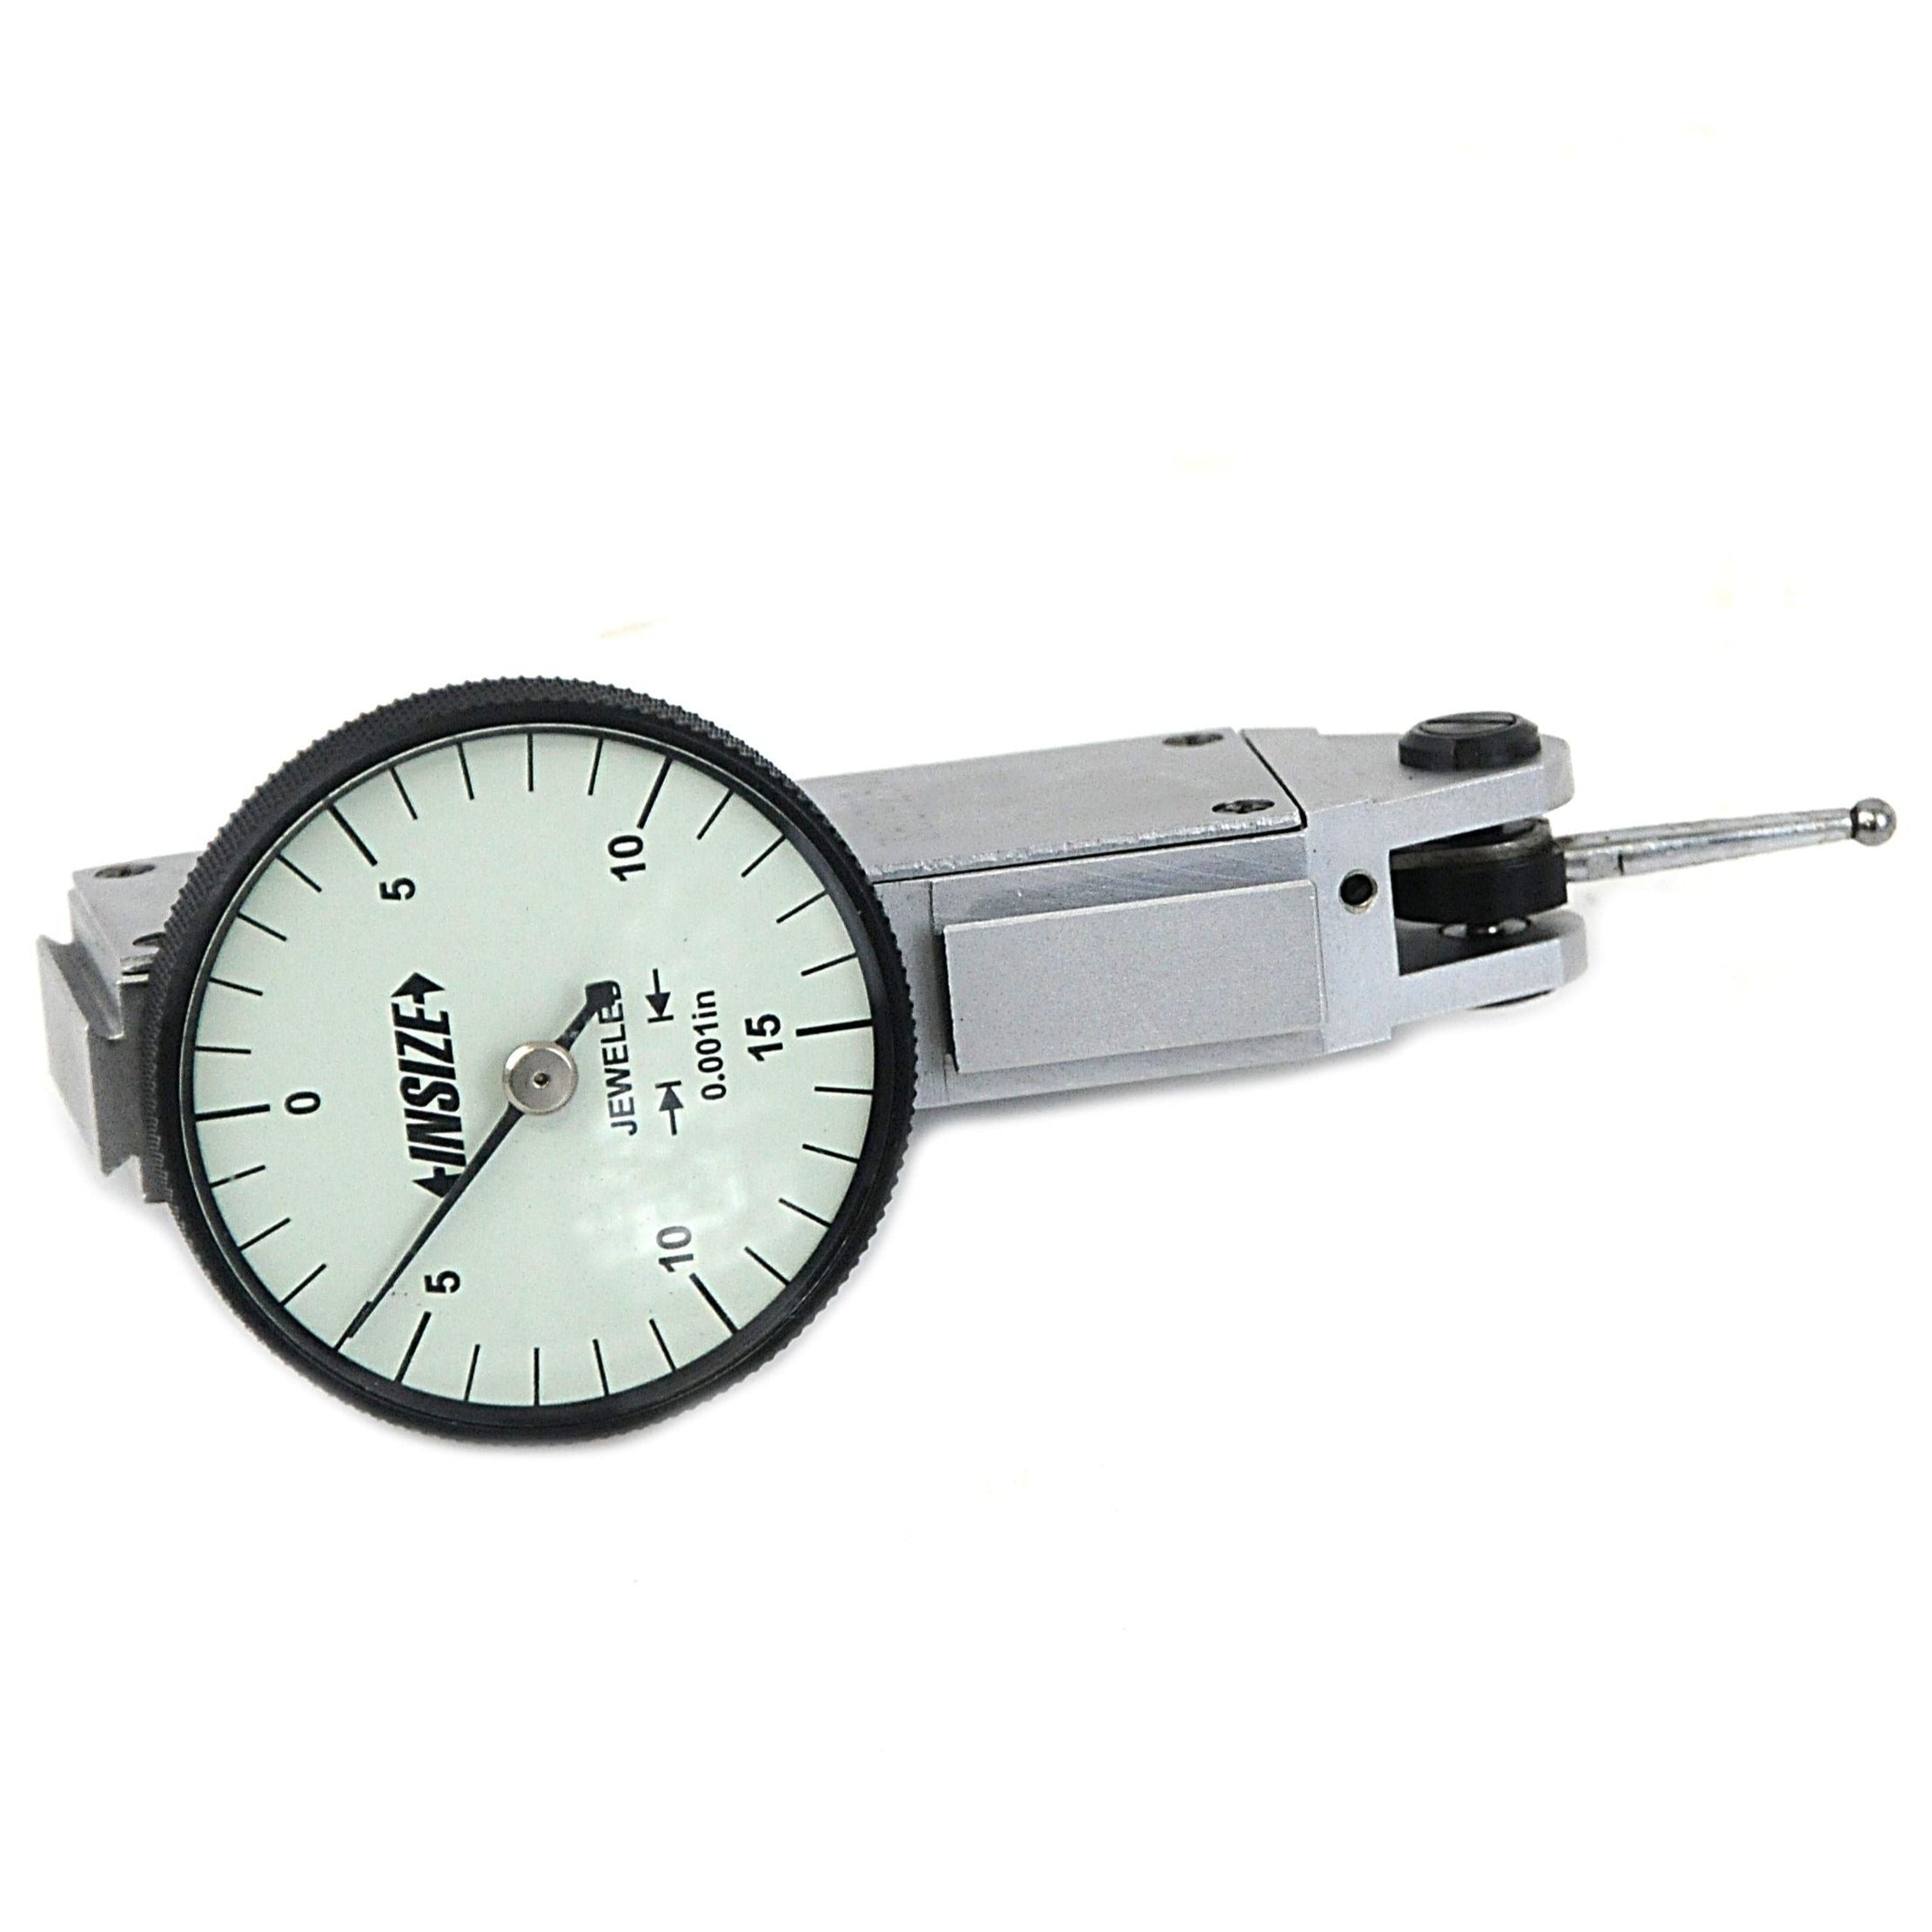 Insize Imperial Dial Indicator 0.03" x 0.001" Range Series 2380-31